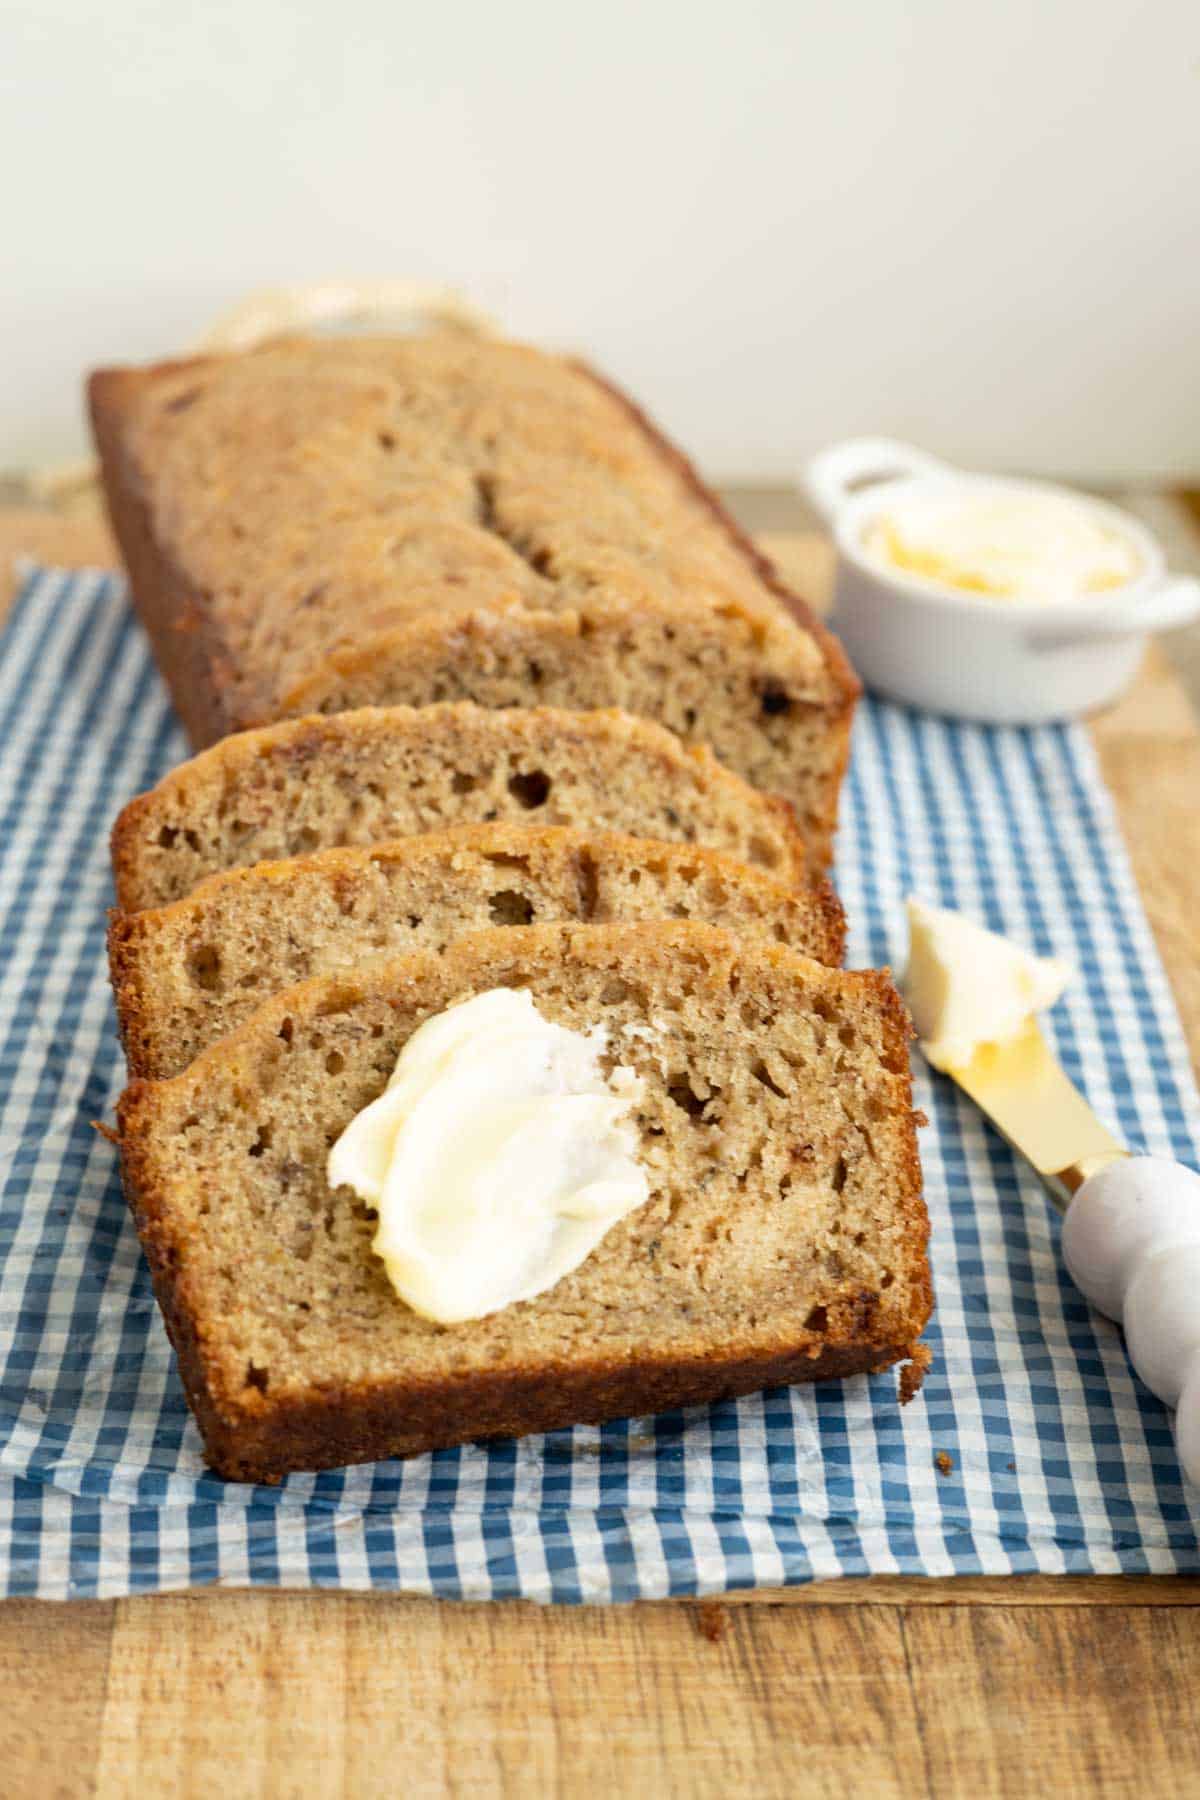 A loaf of banana bread with a few slices spread with butter.